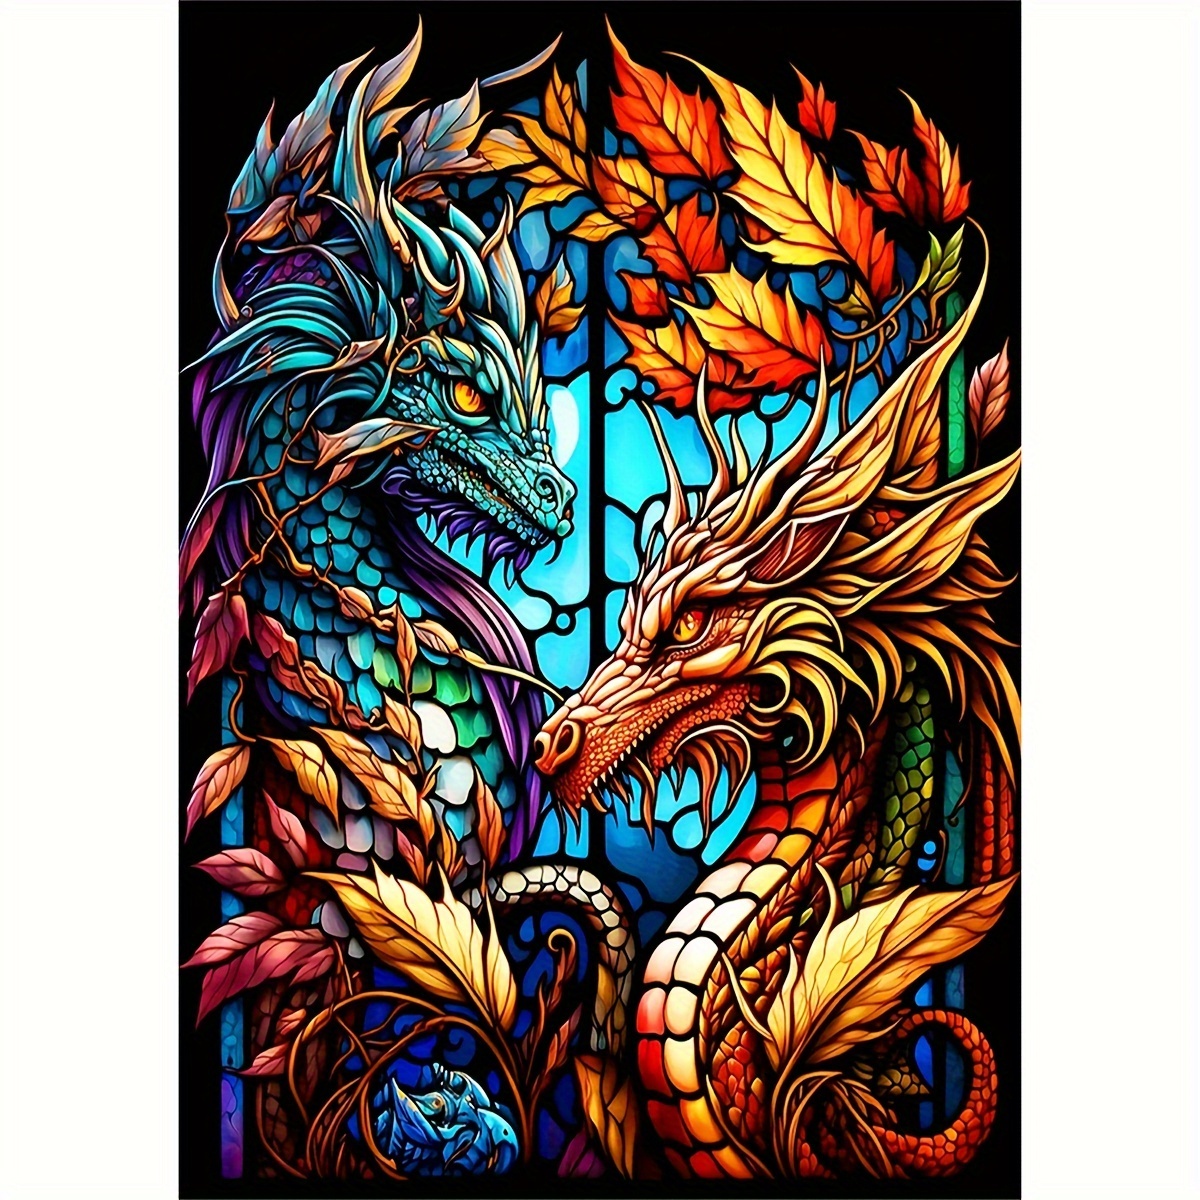 

1pc Large Size 40*50cm/15.7*19.7in Frameless Christmas Holiday Surprise Gift Diy Handmade 5d Diamond Painting Dragon Full Diamond Painting Art Embroidery Diamond Painting Art Craft Wall Decoration